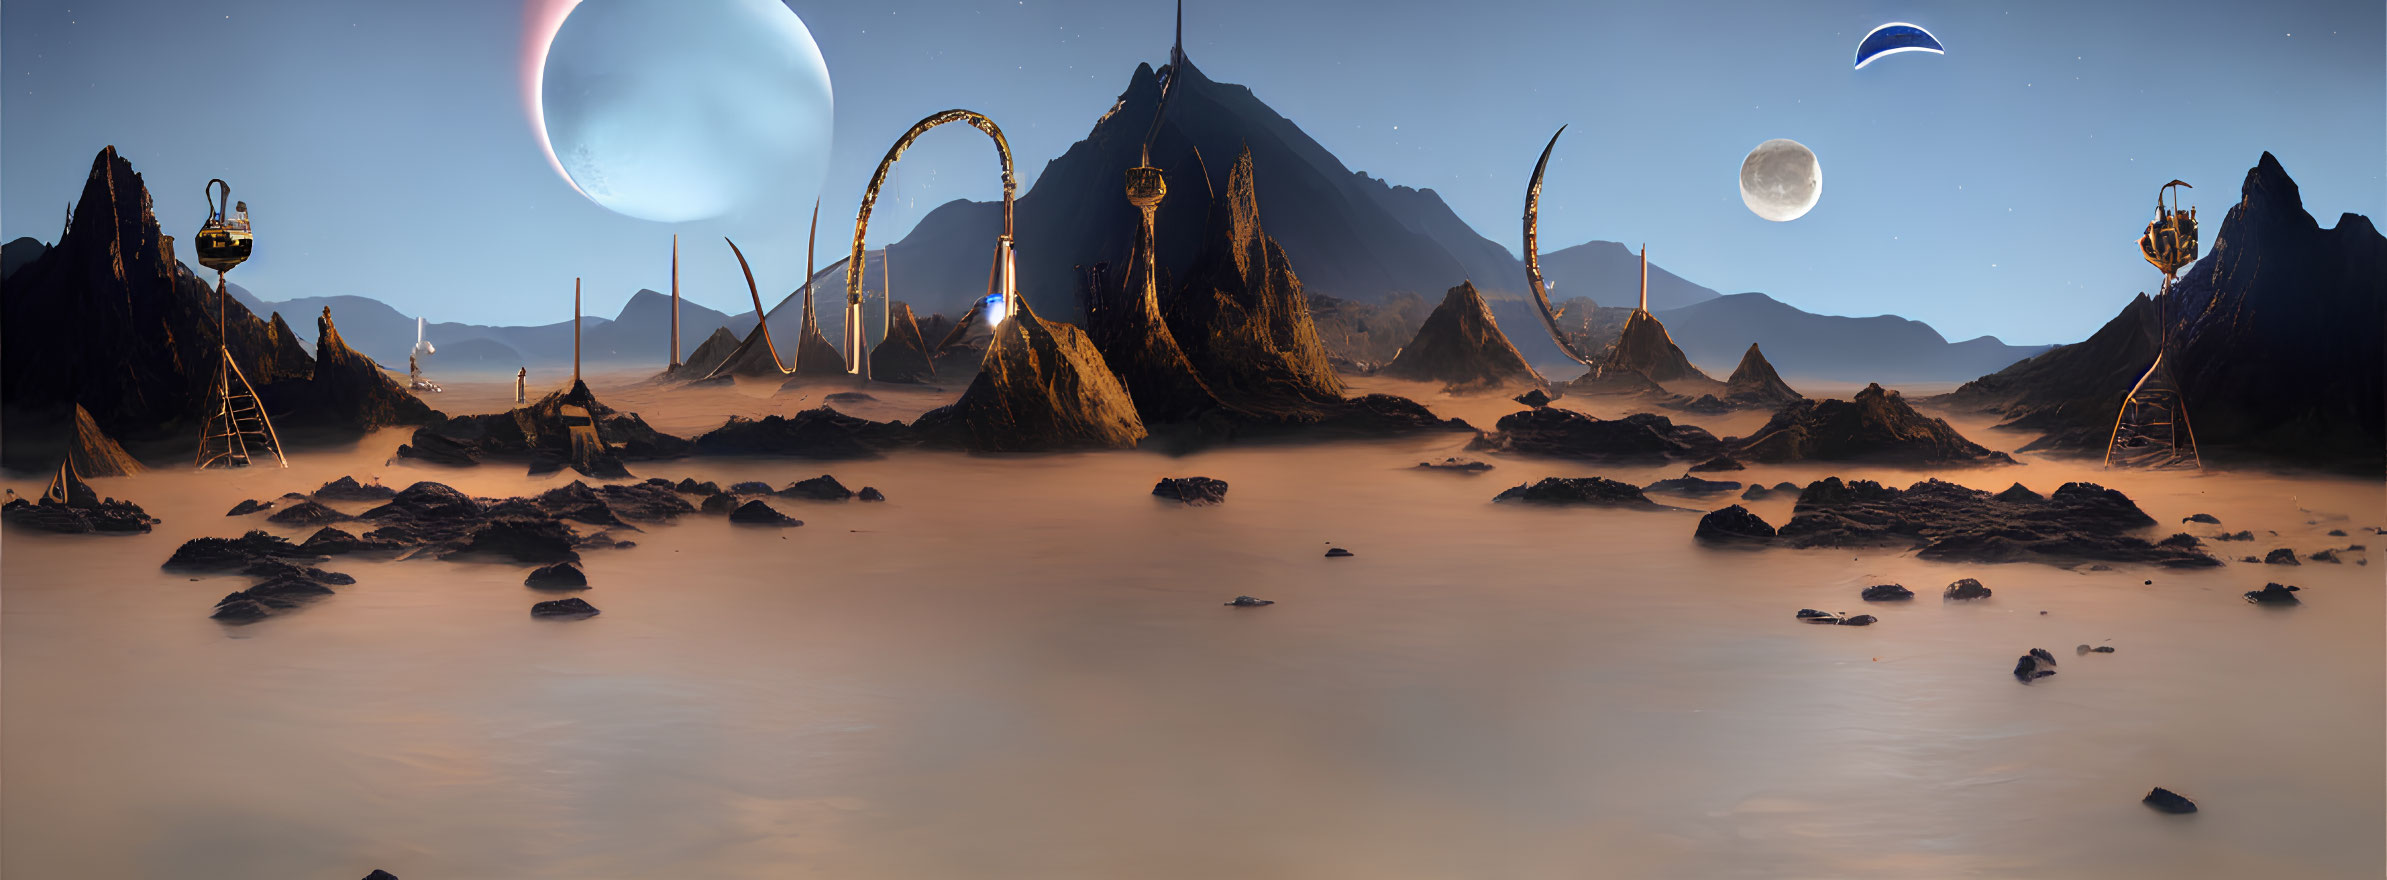 Panoramic alien landscape with cable cars, ring structures, and celestial bodies